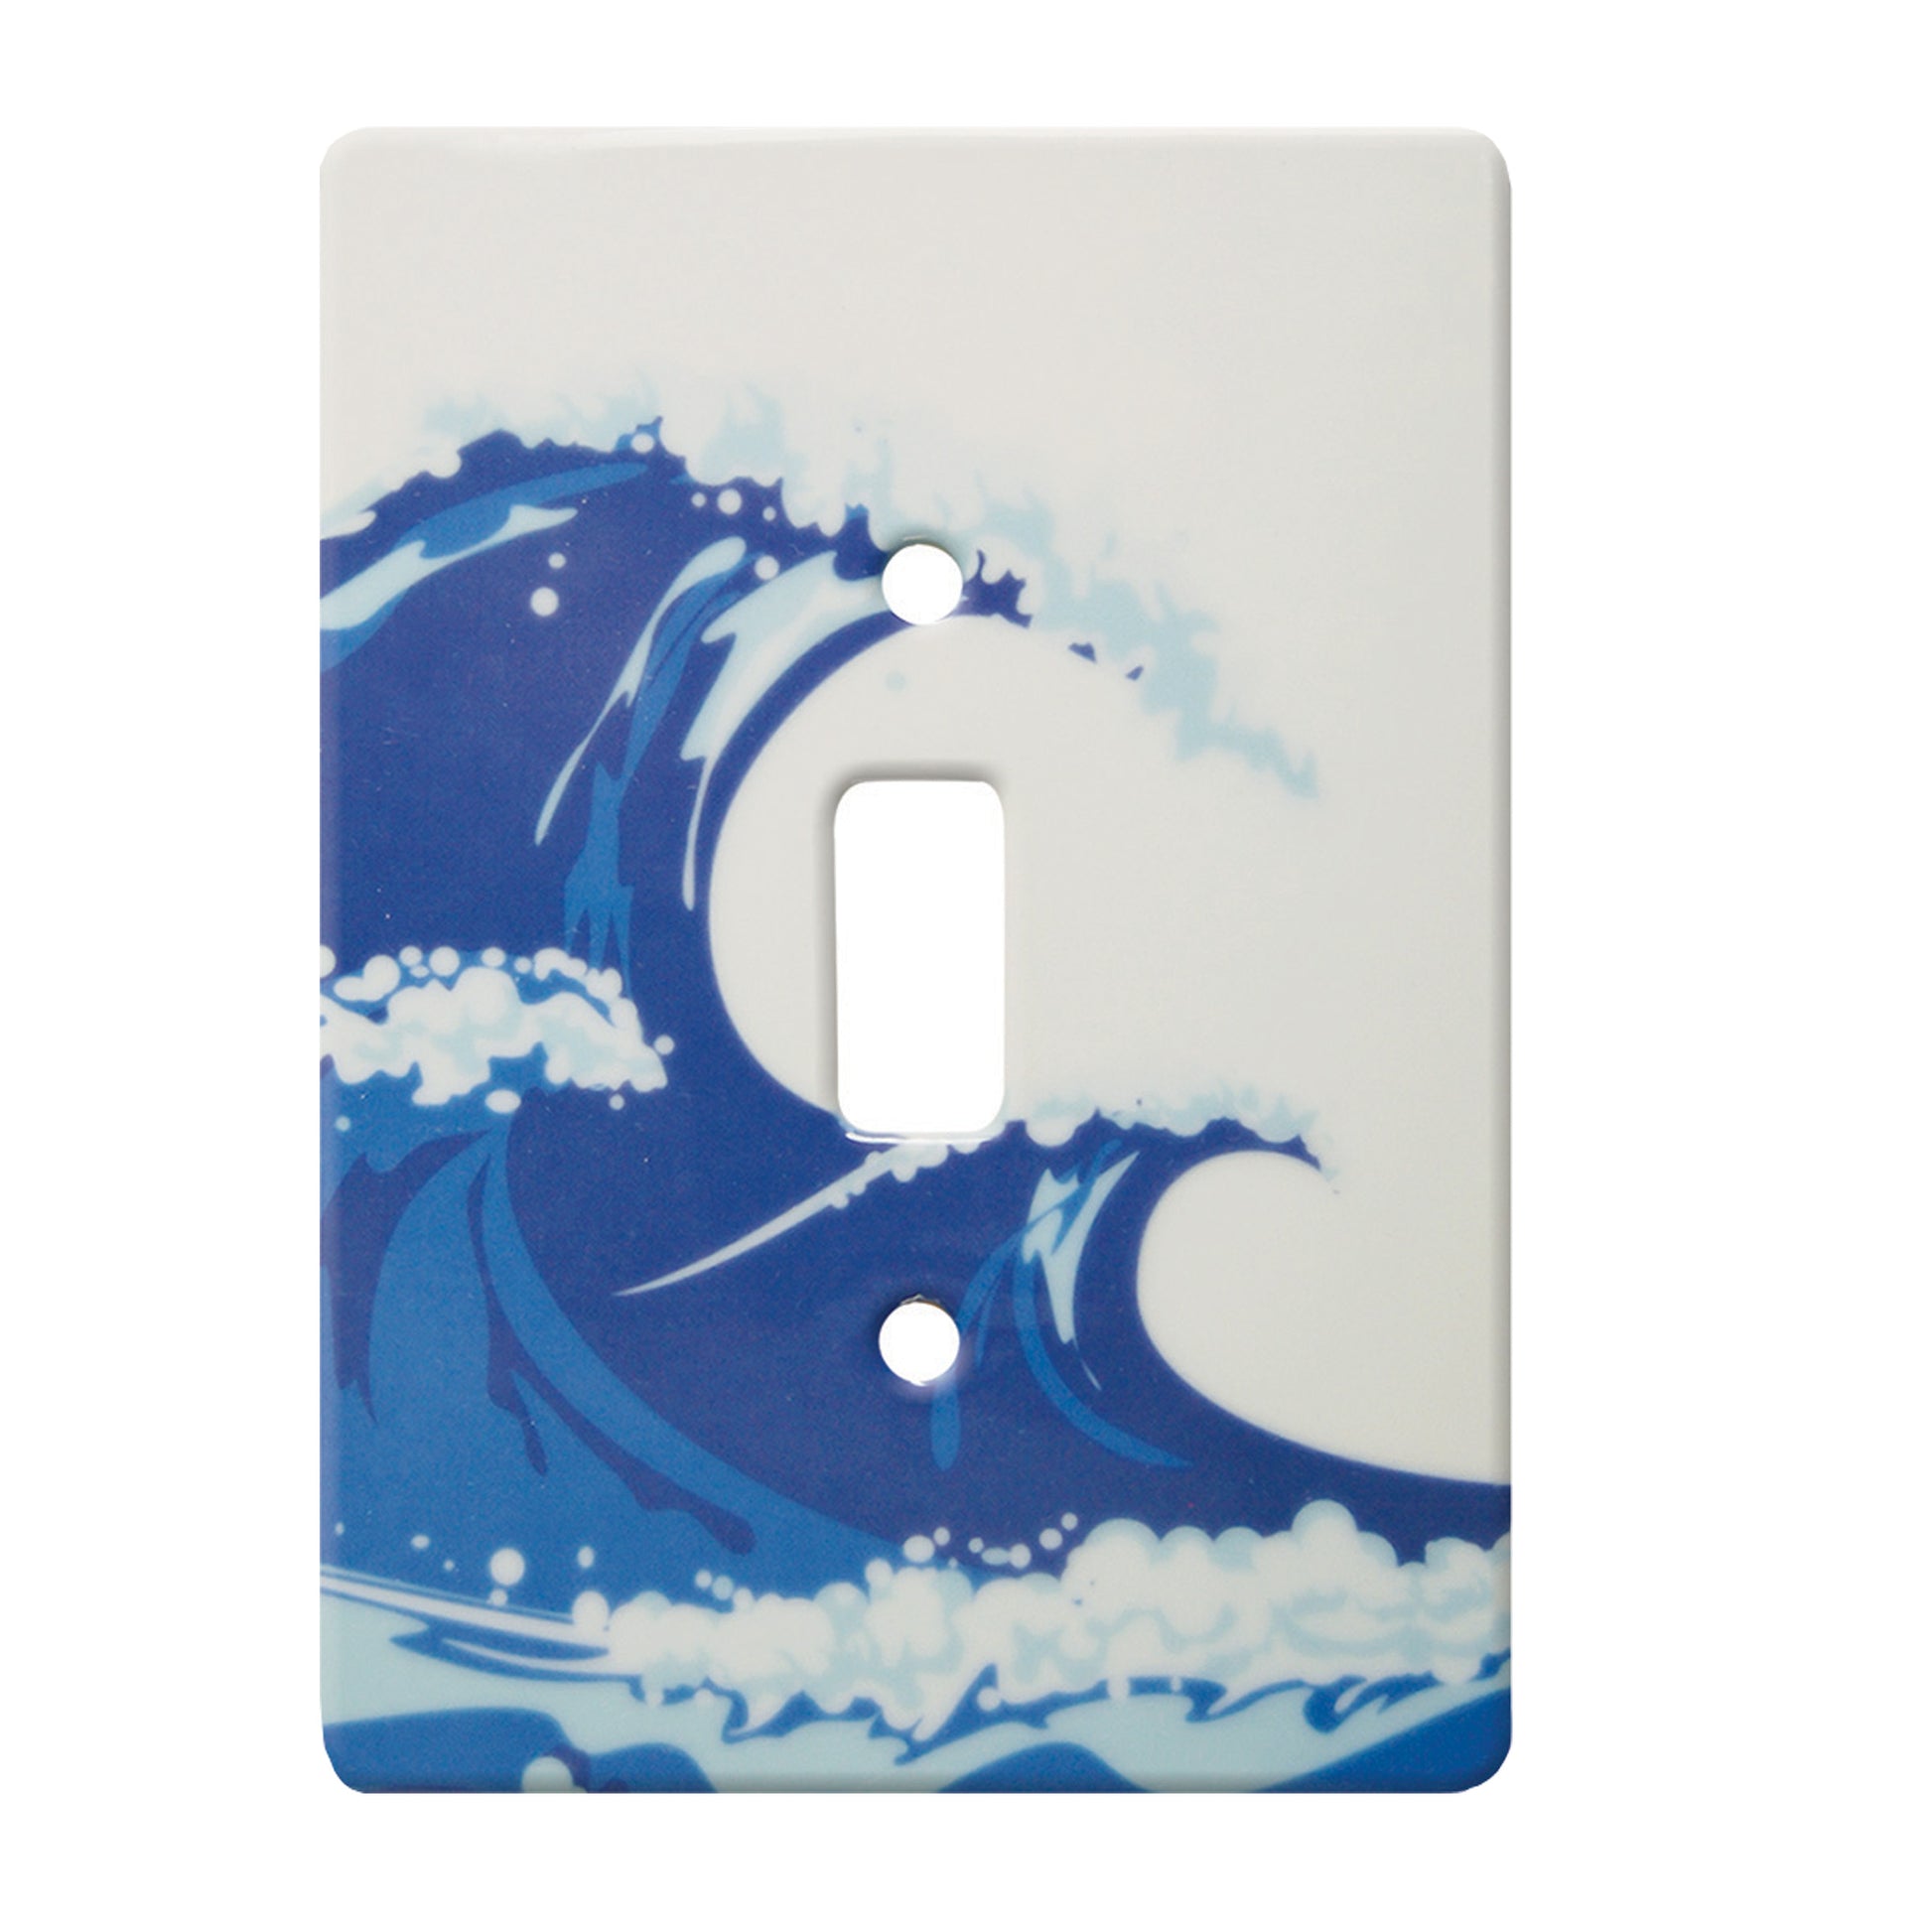 white ceramic single toggle switch plate featuring a blue wave.